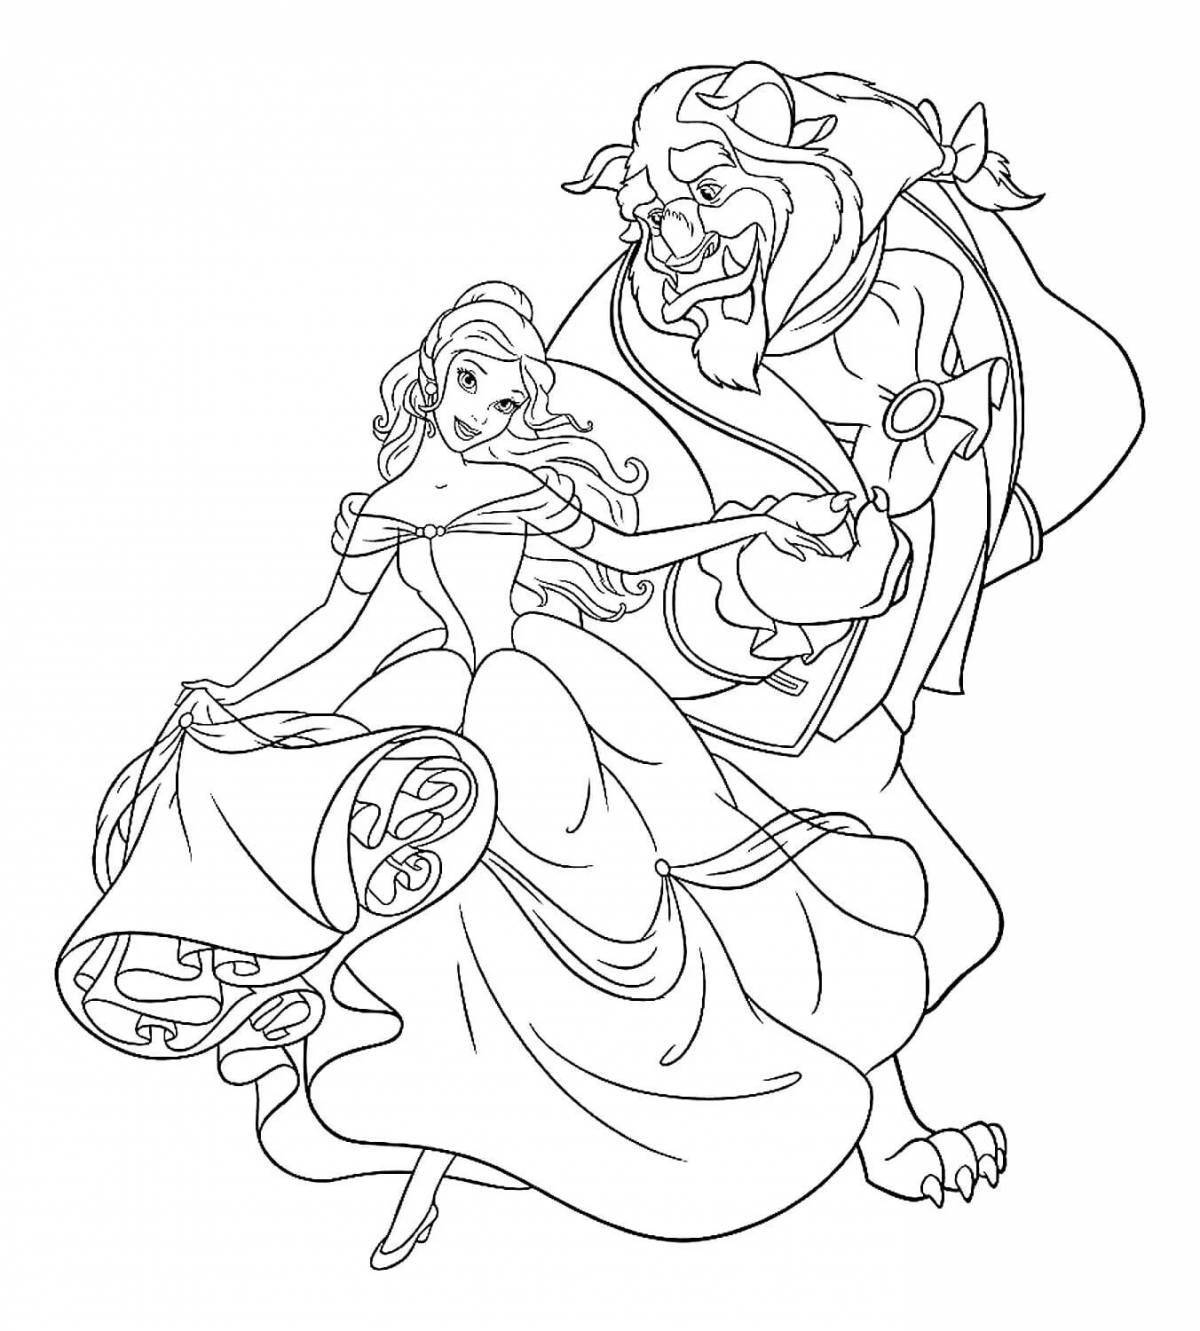 Coloring page wild belle and the monster